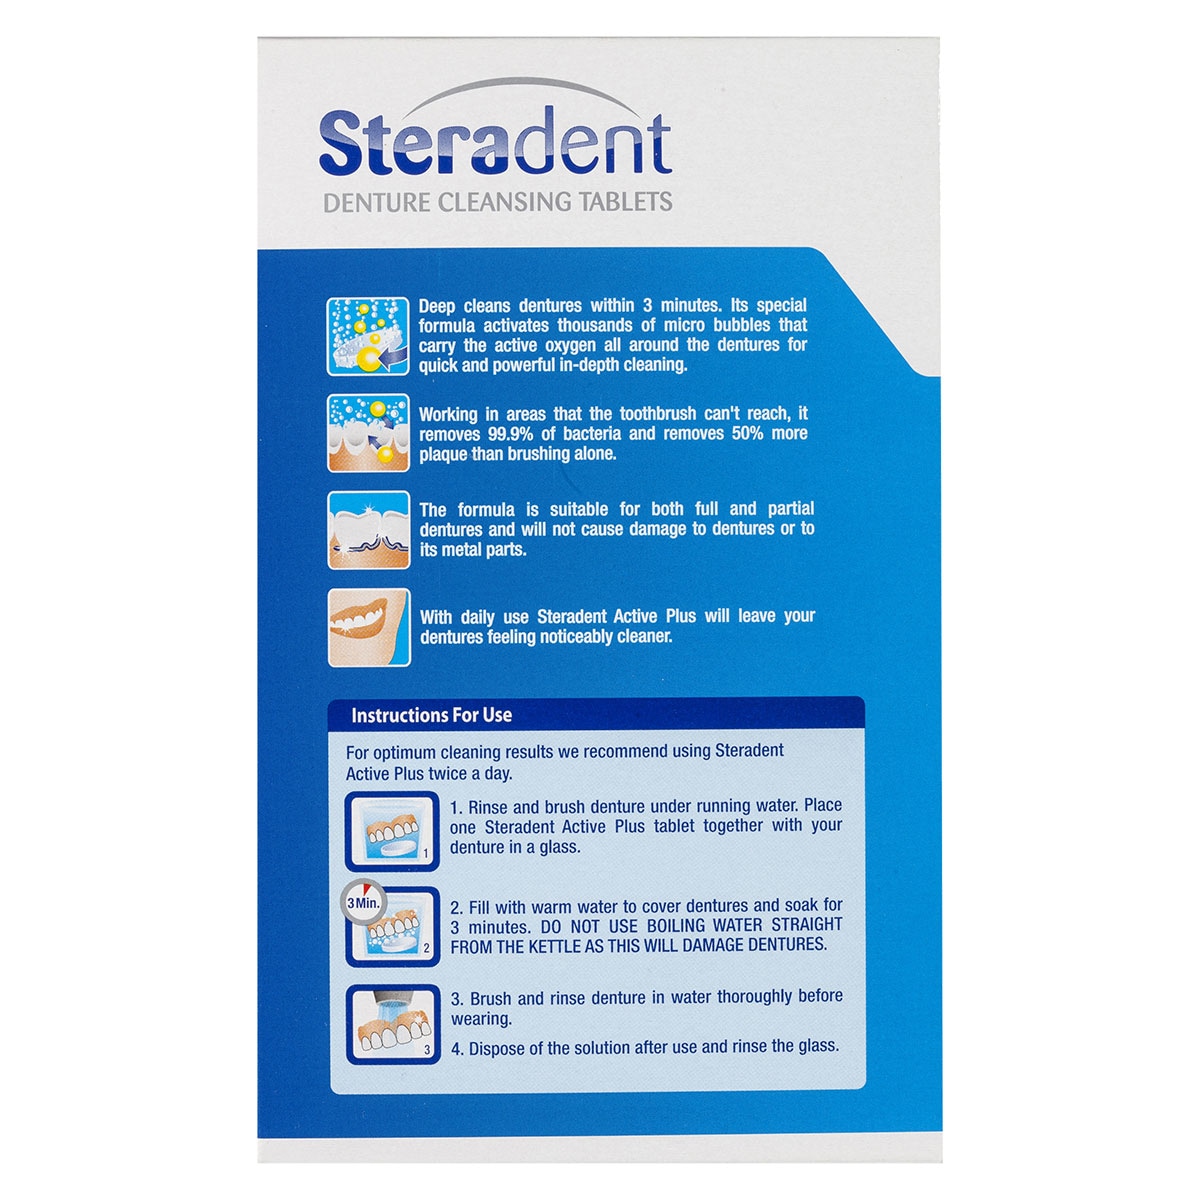 Steradent Active Plus Denture Cleansing Tablets Express 48 Tablets